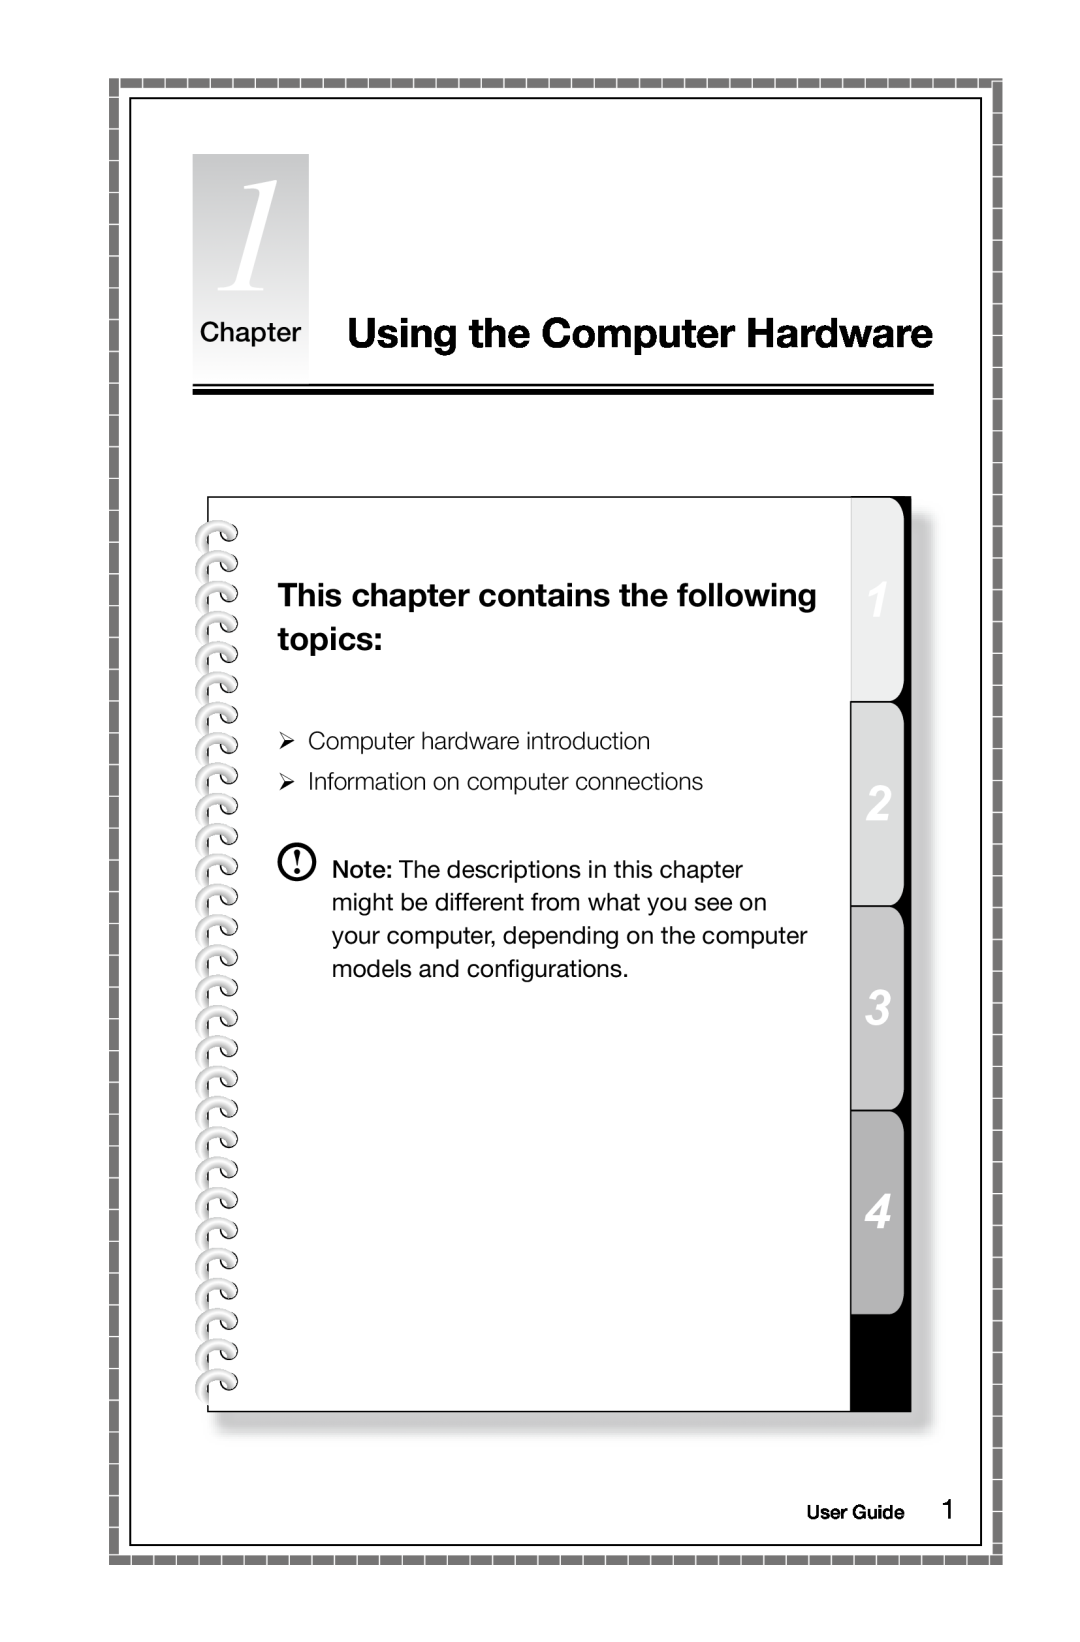 Lenovo 10066/7747, 10073/1169 Chapter Using the Computer Hardware, This chapter contains the following topics, User Guide 